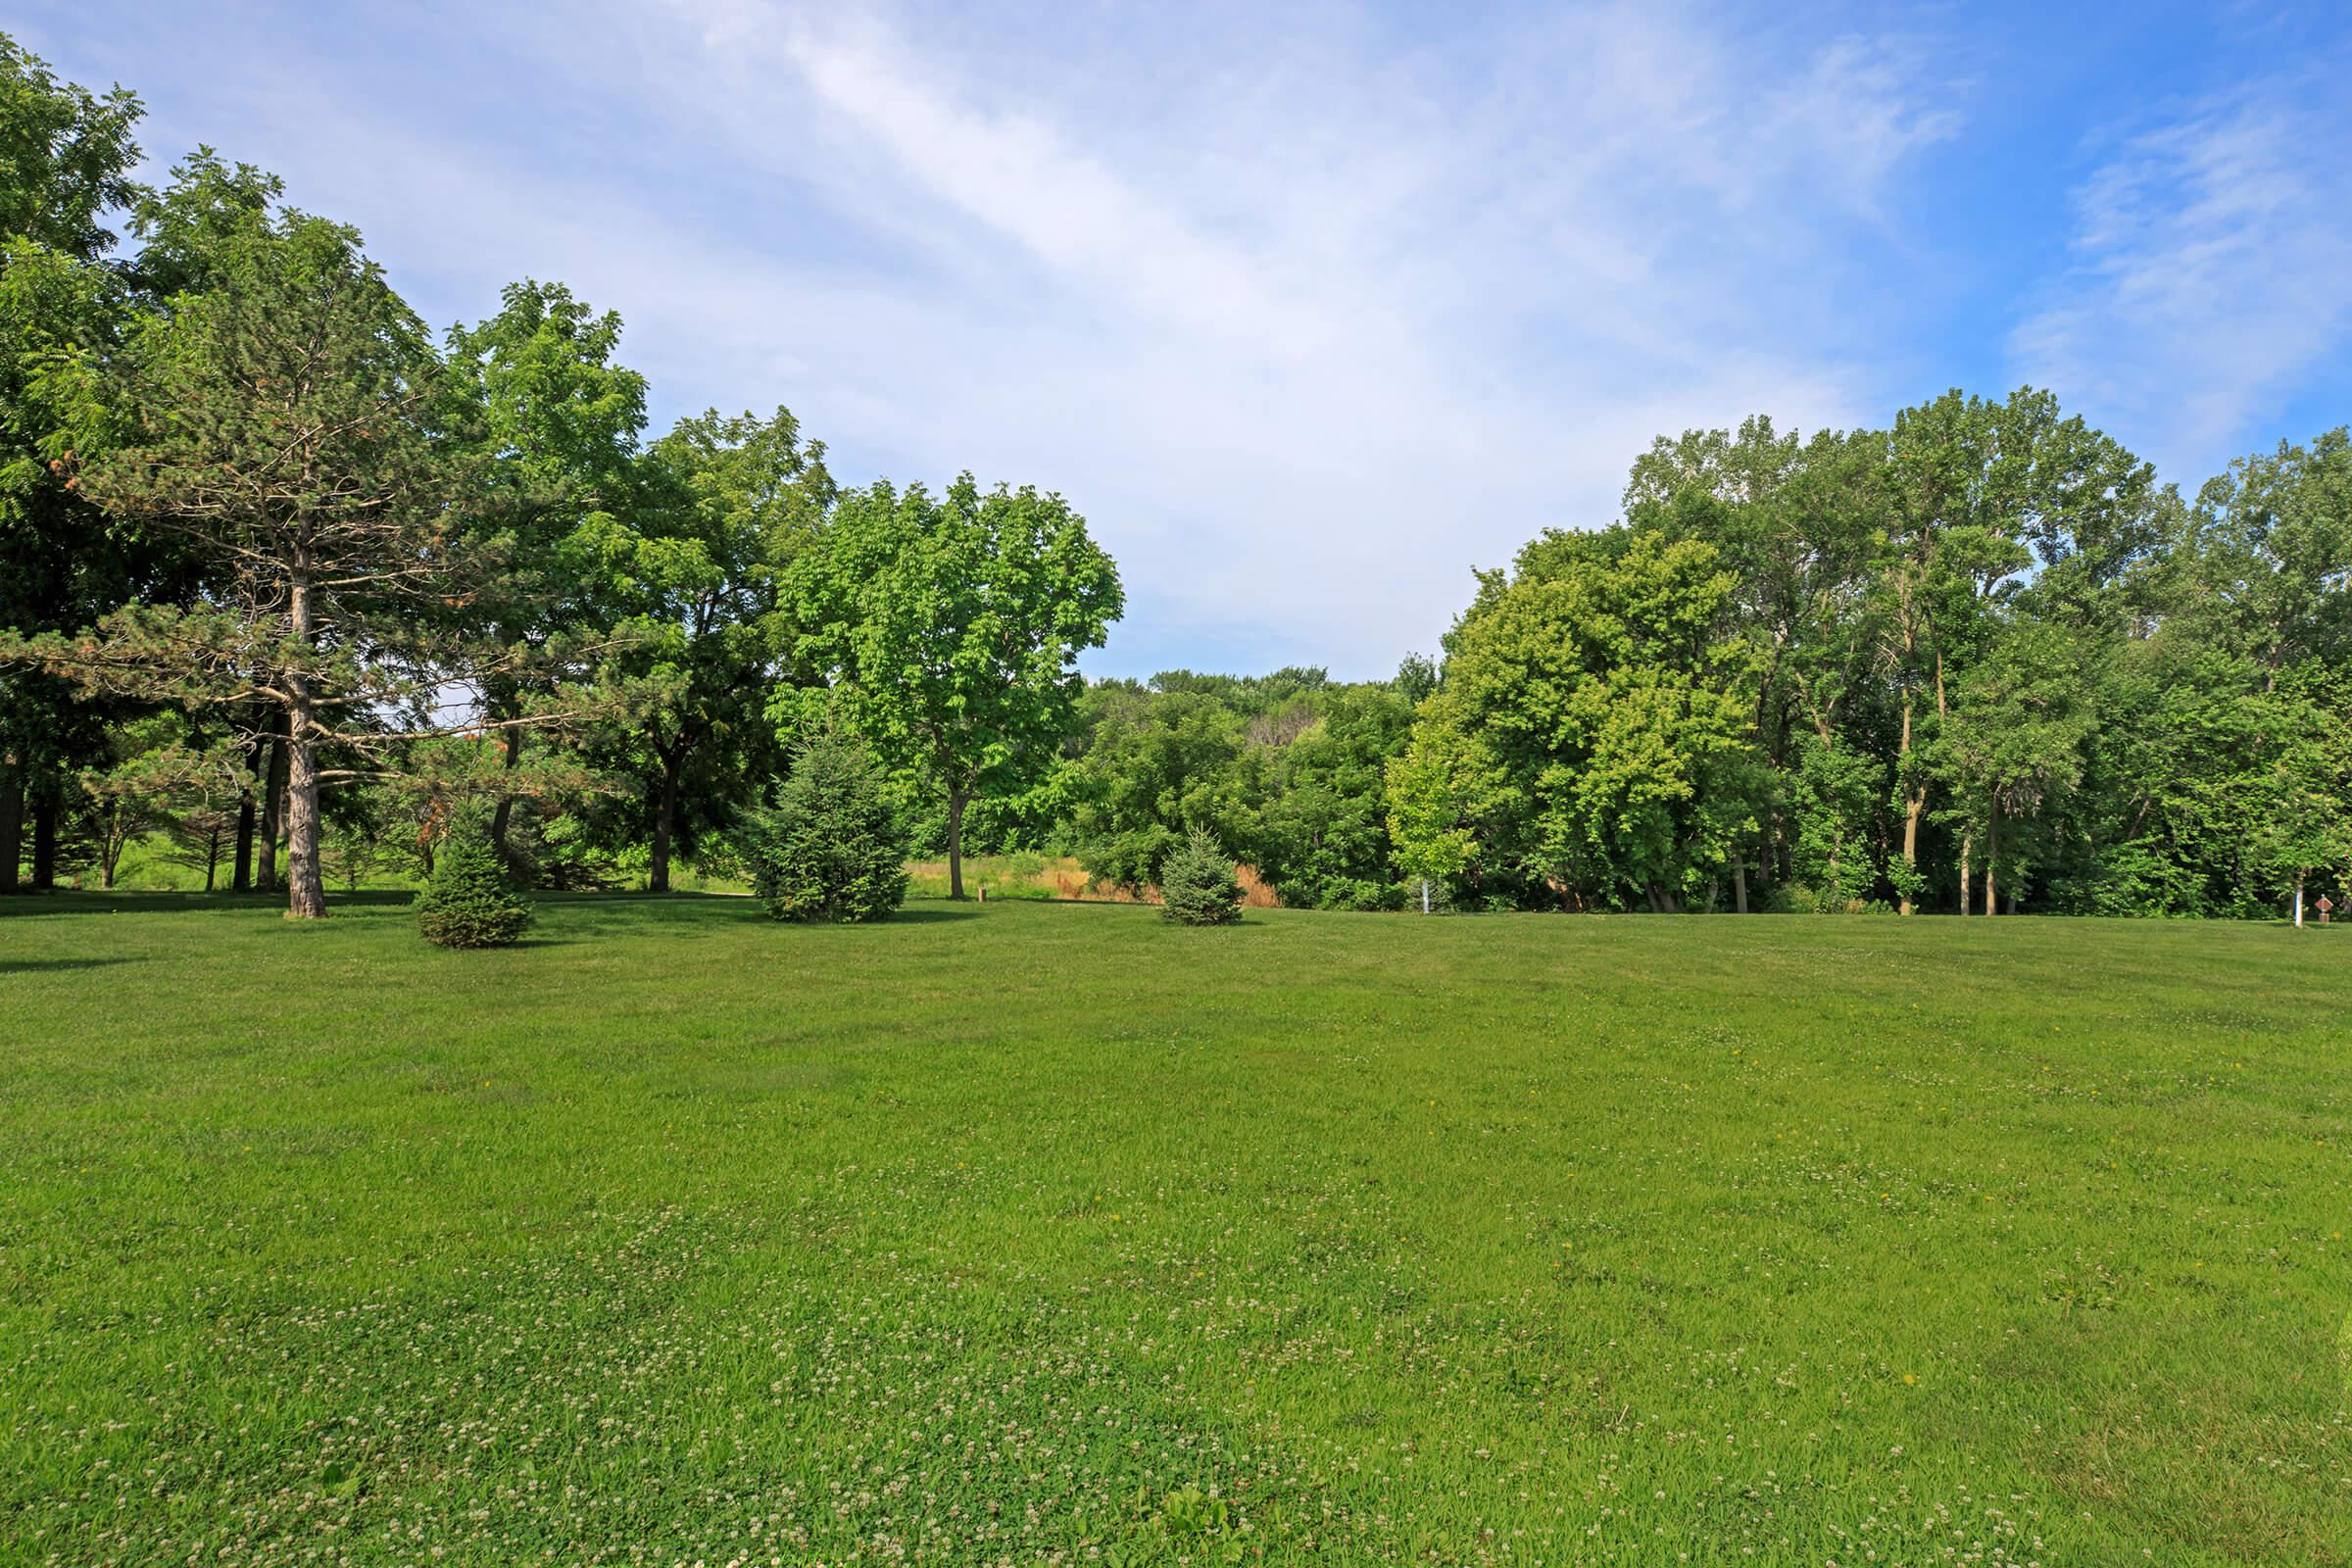 a large green field with trees in the background